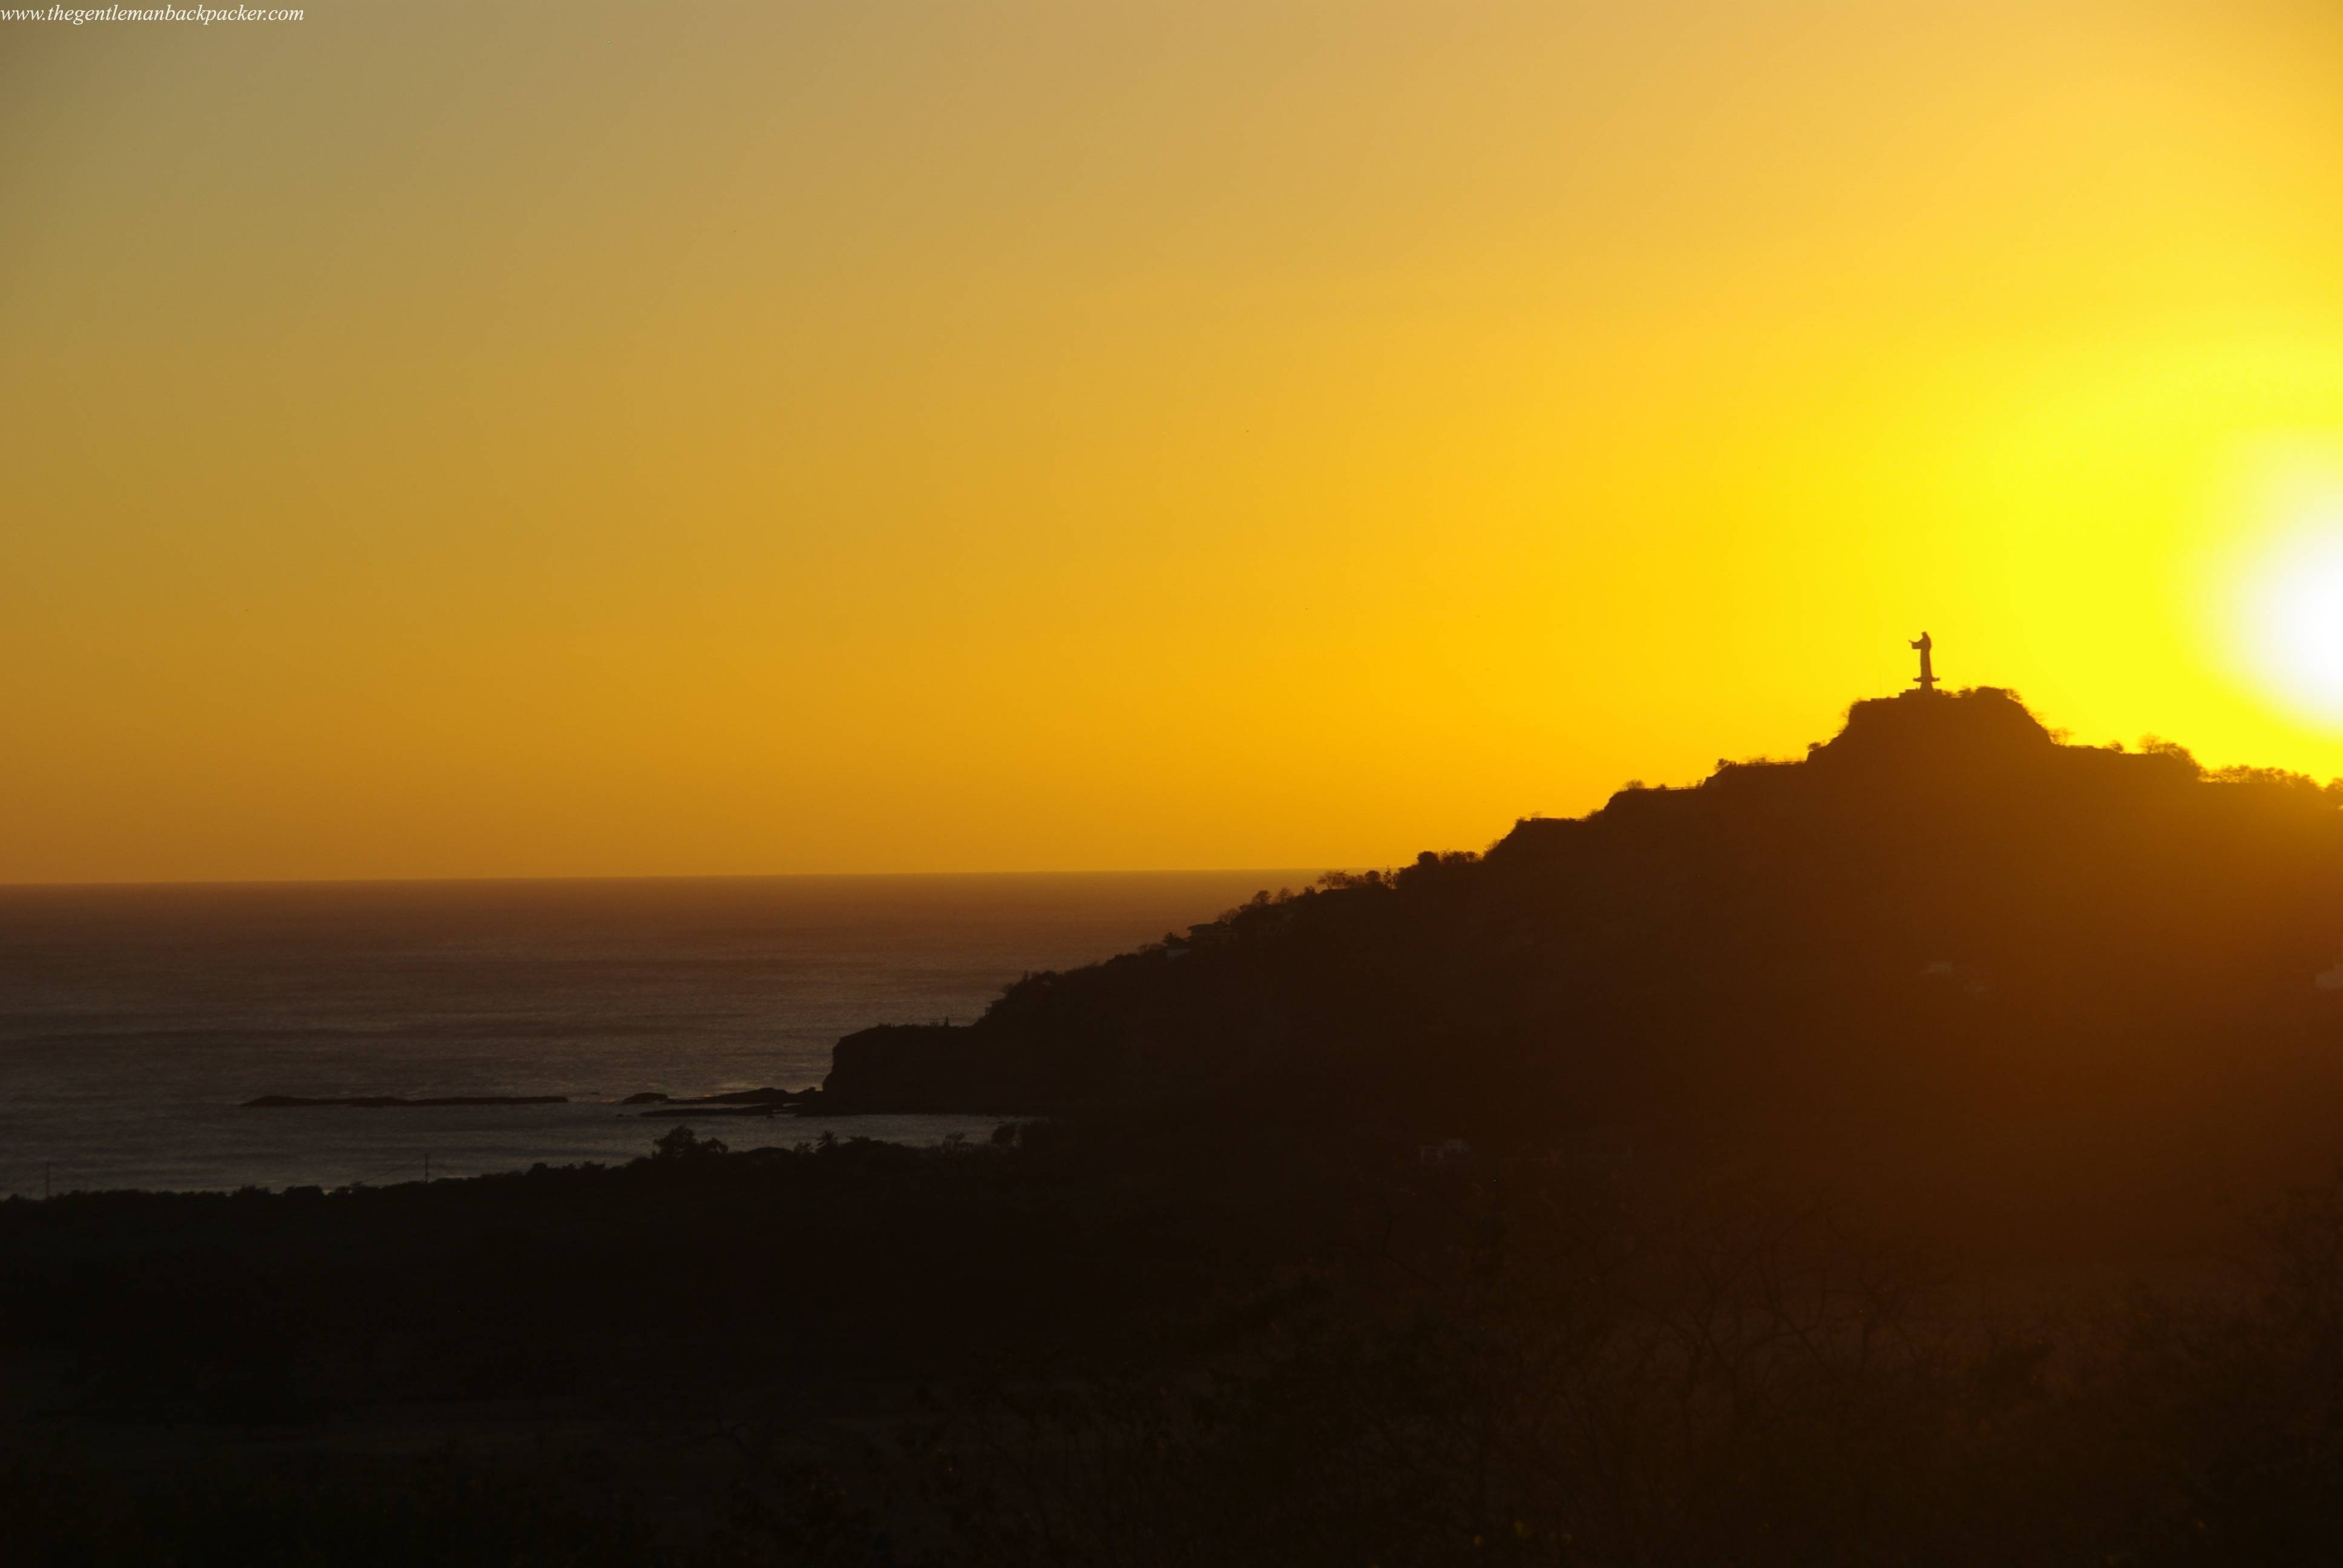 Sunset and Statue of Christ, from Casa de Olas